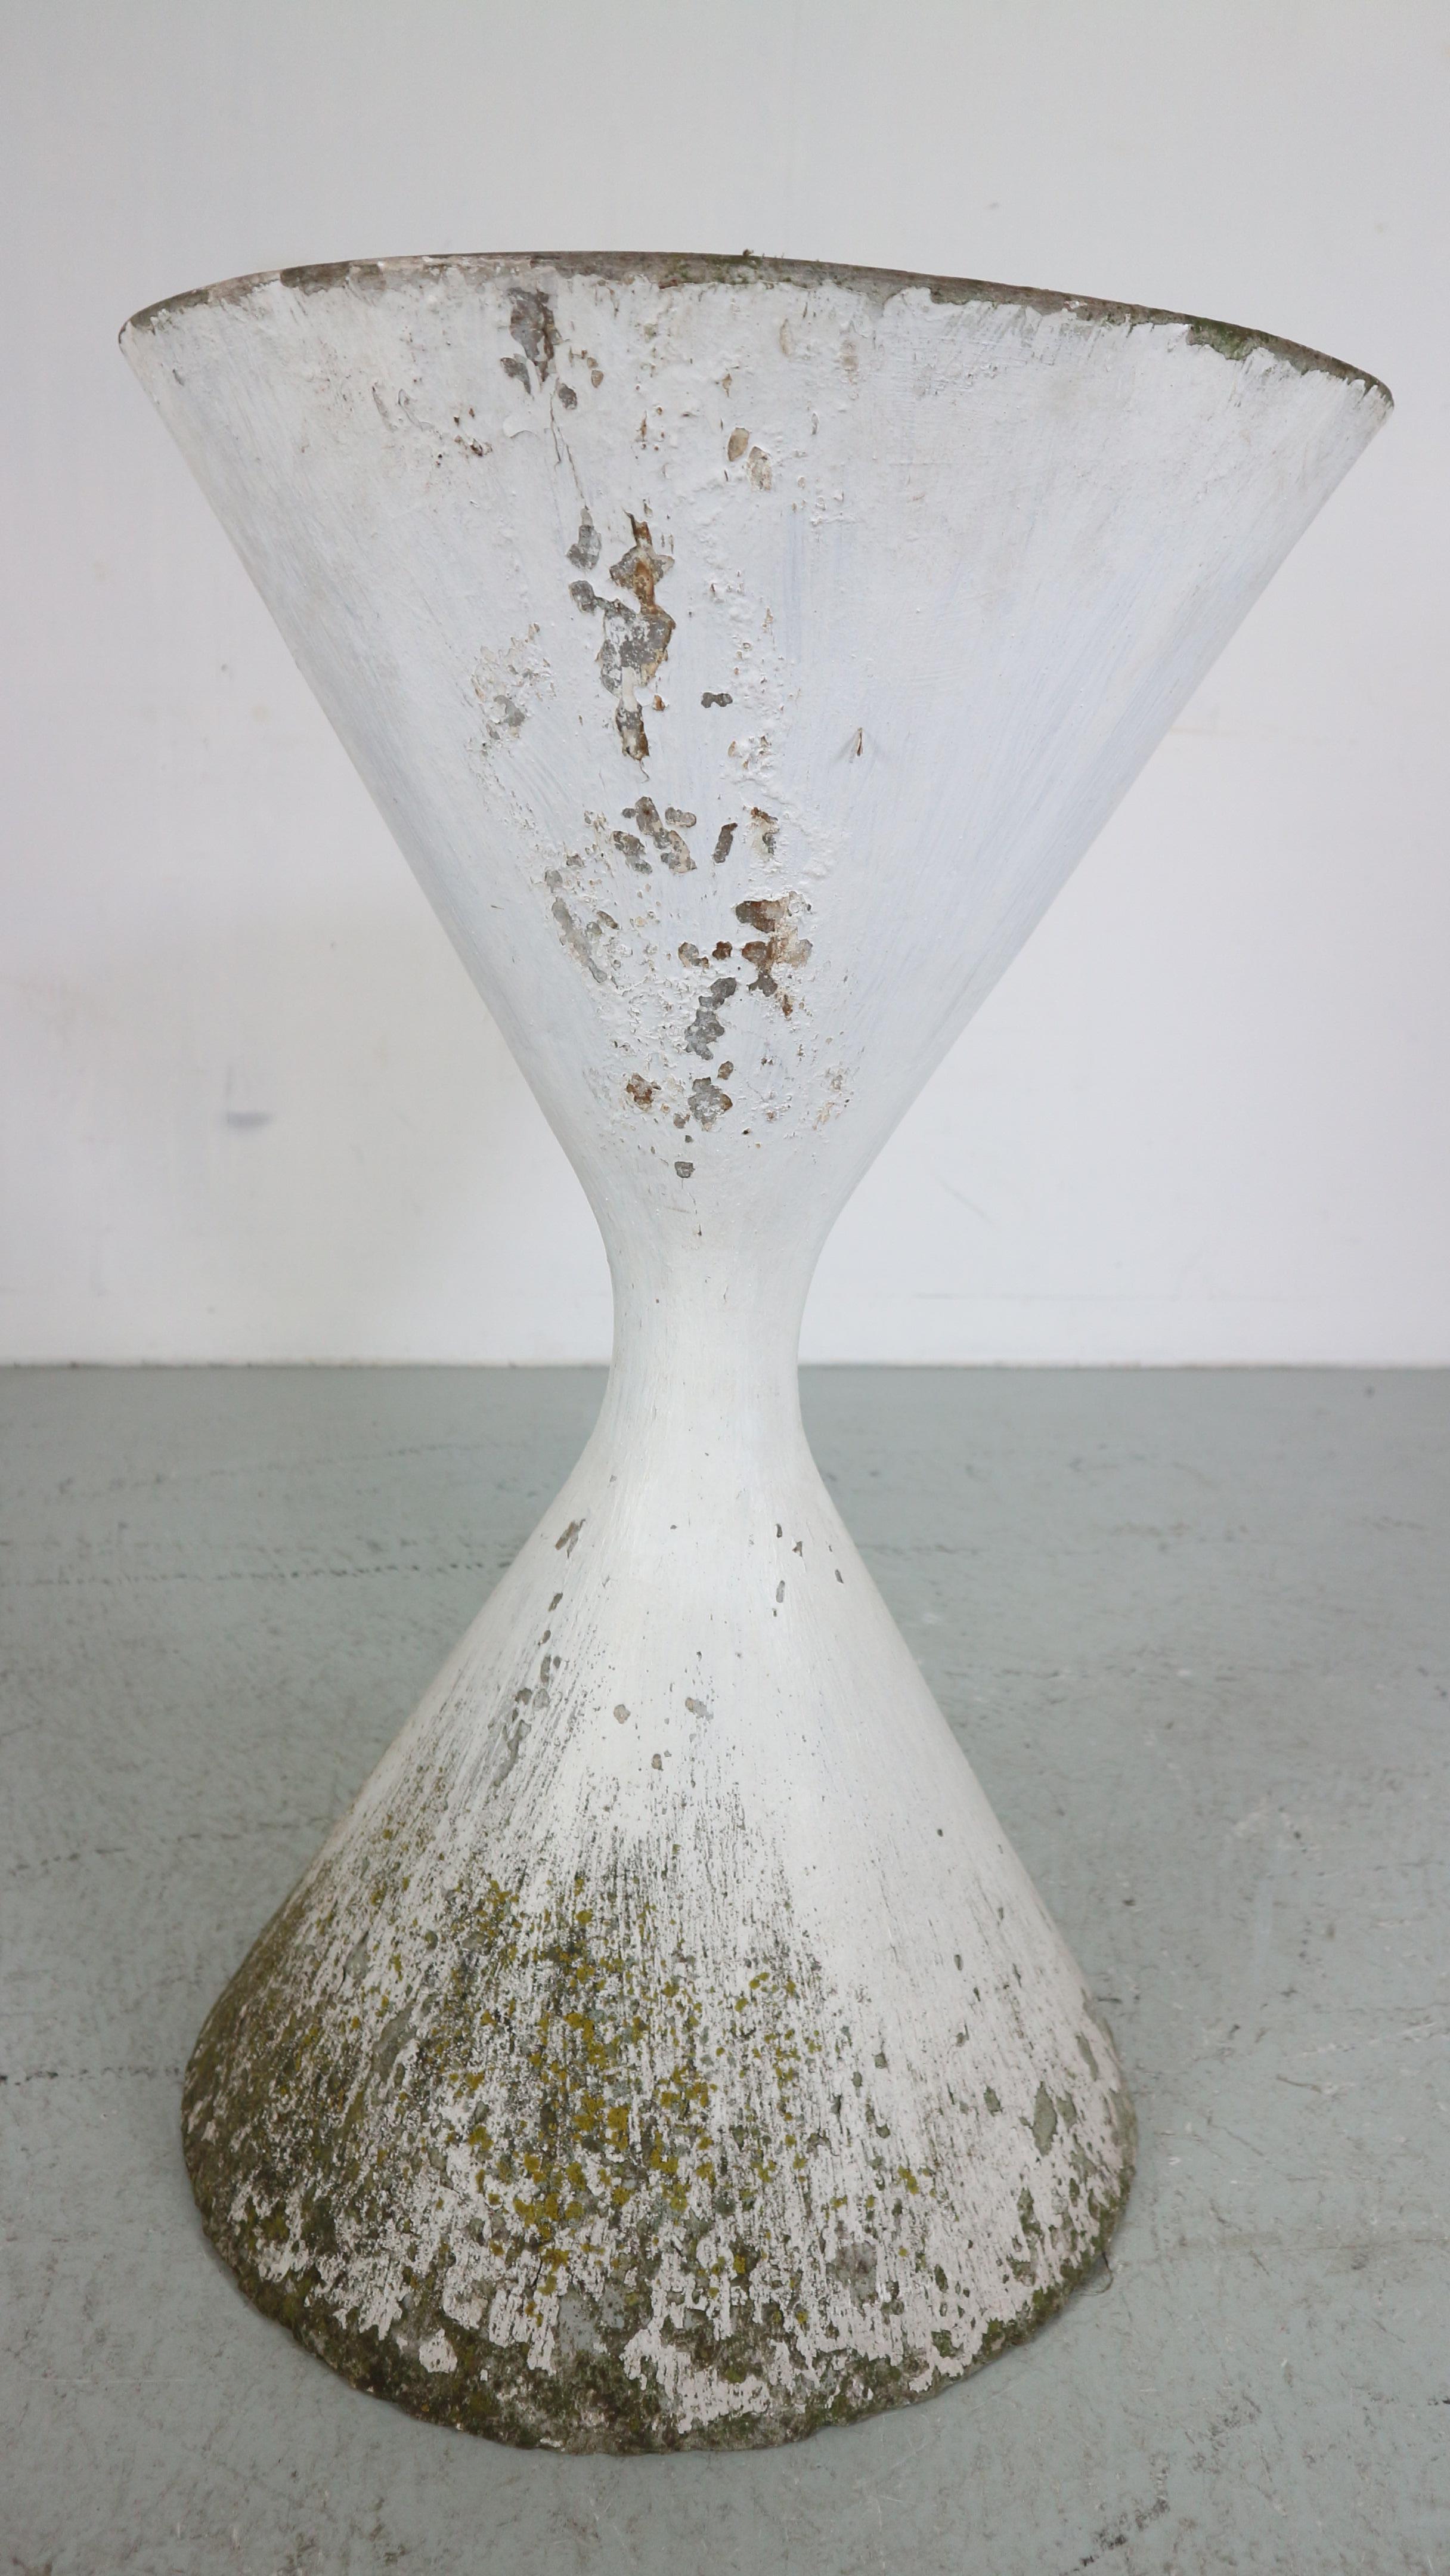 Willy Guhl 'Diablo' Spindel Hourglass Concrete Planter, Switzerland, 1954 In Good Condition For Sale In The Hague, NL